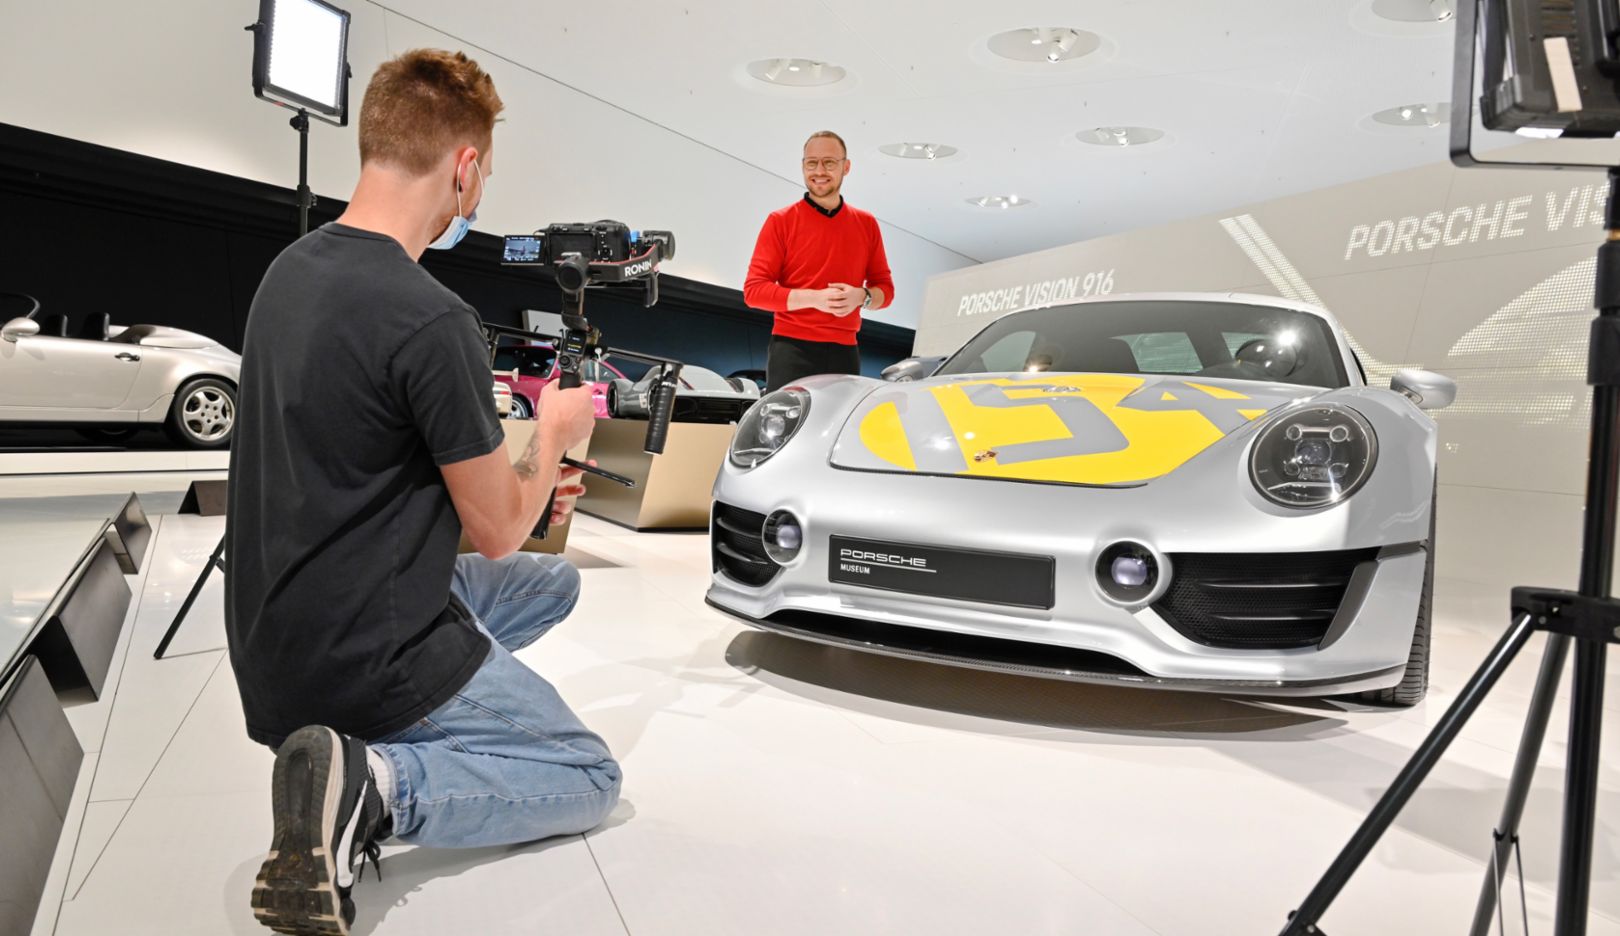 Virtual tour of the special exhibition at the Porsche Museum